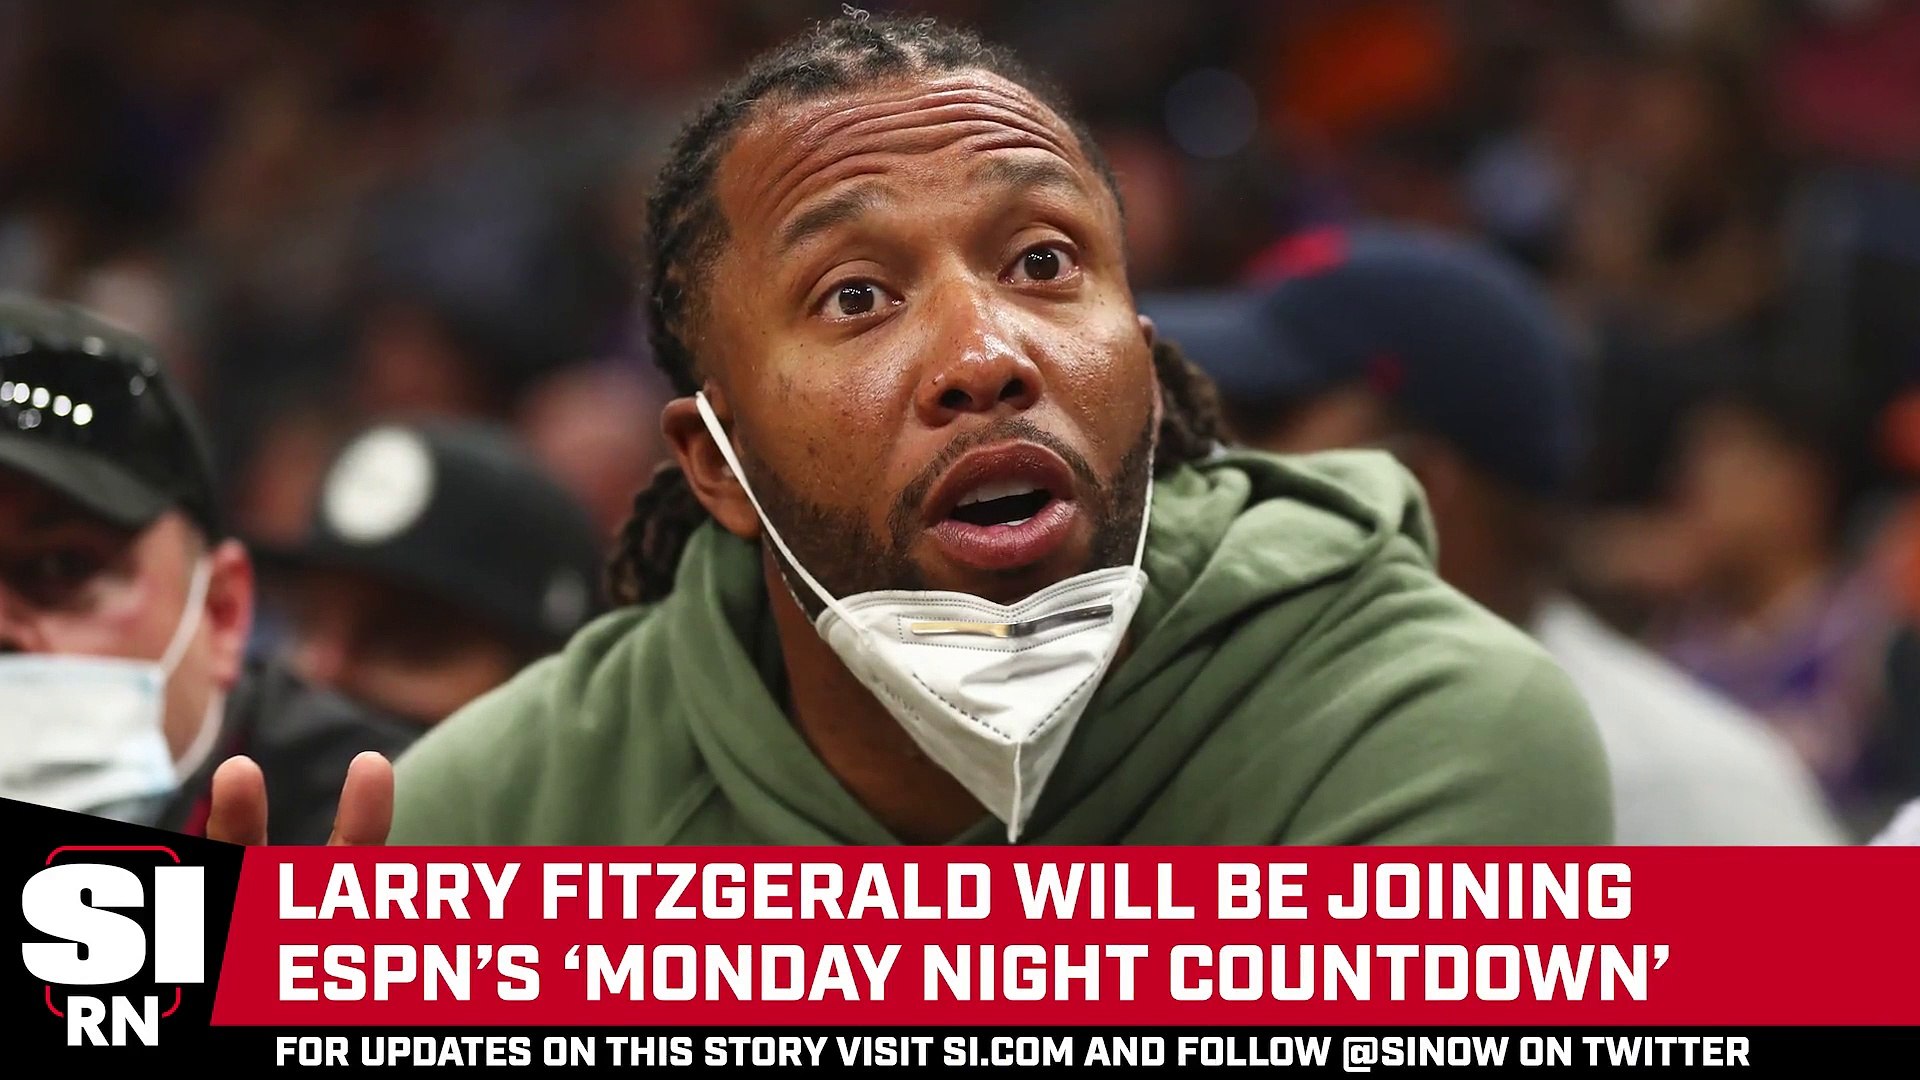 Larry Fitzgerald talks about his work on 'Monday Night Countdown